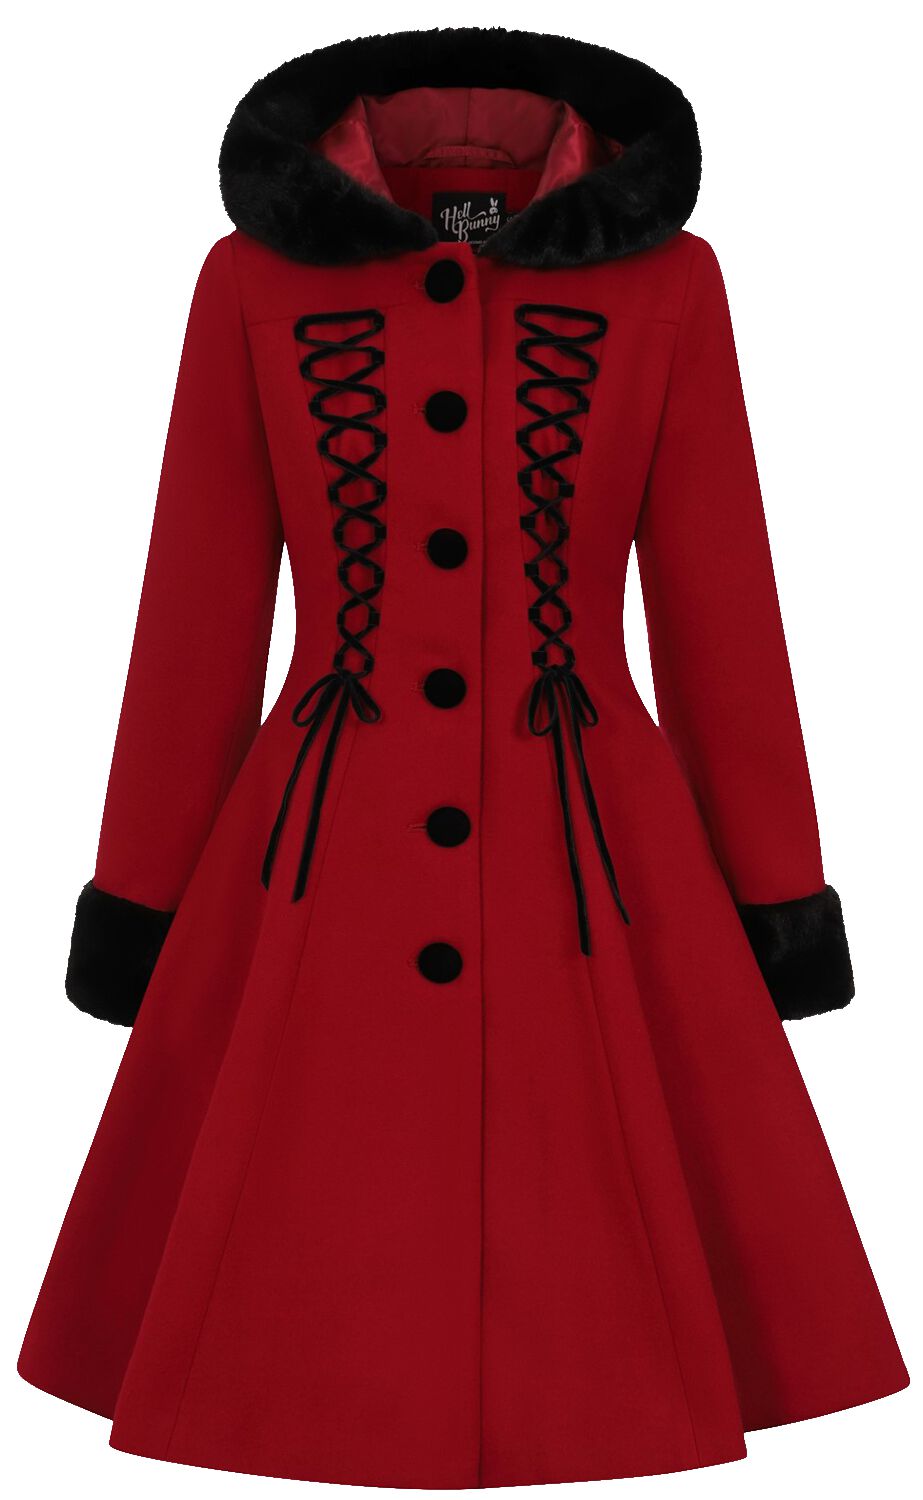 Image of Cappotti Gothic di Hell Bunny - Amaya Coat - XS a 4XL - Donna - rosso/nero